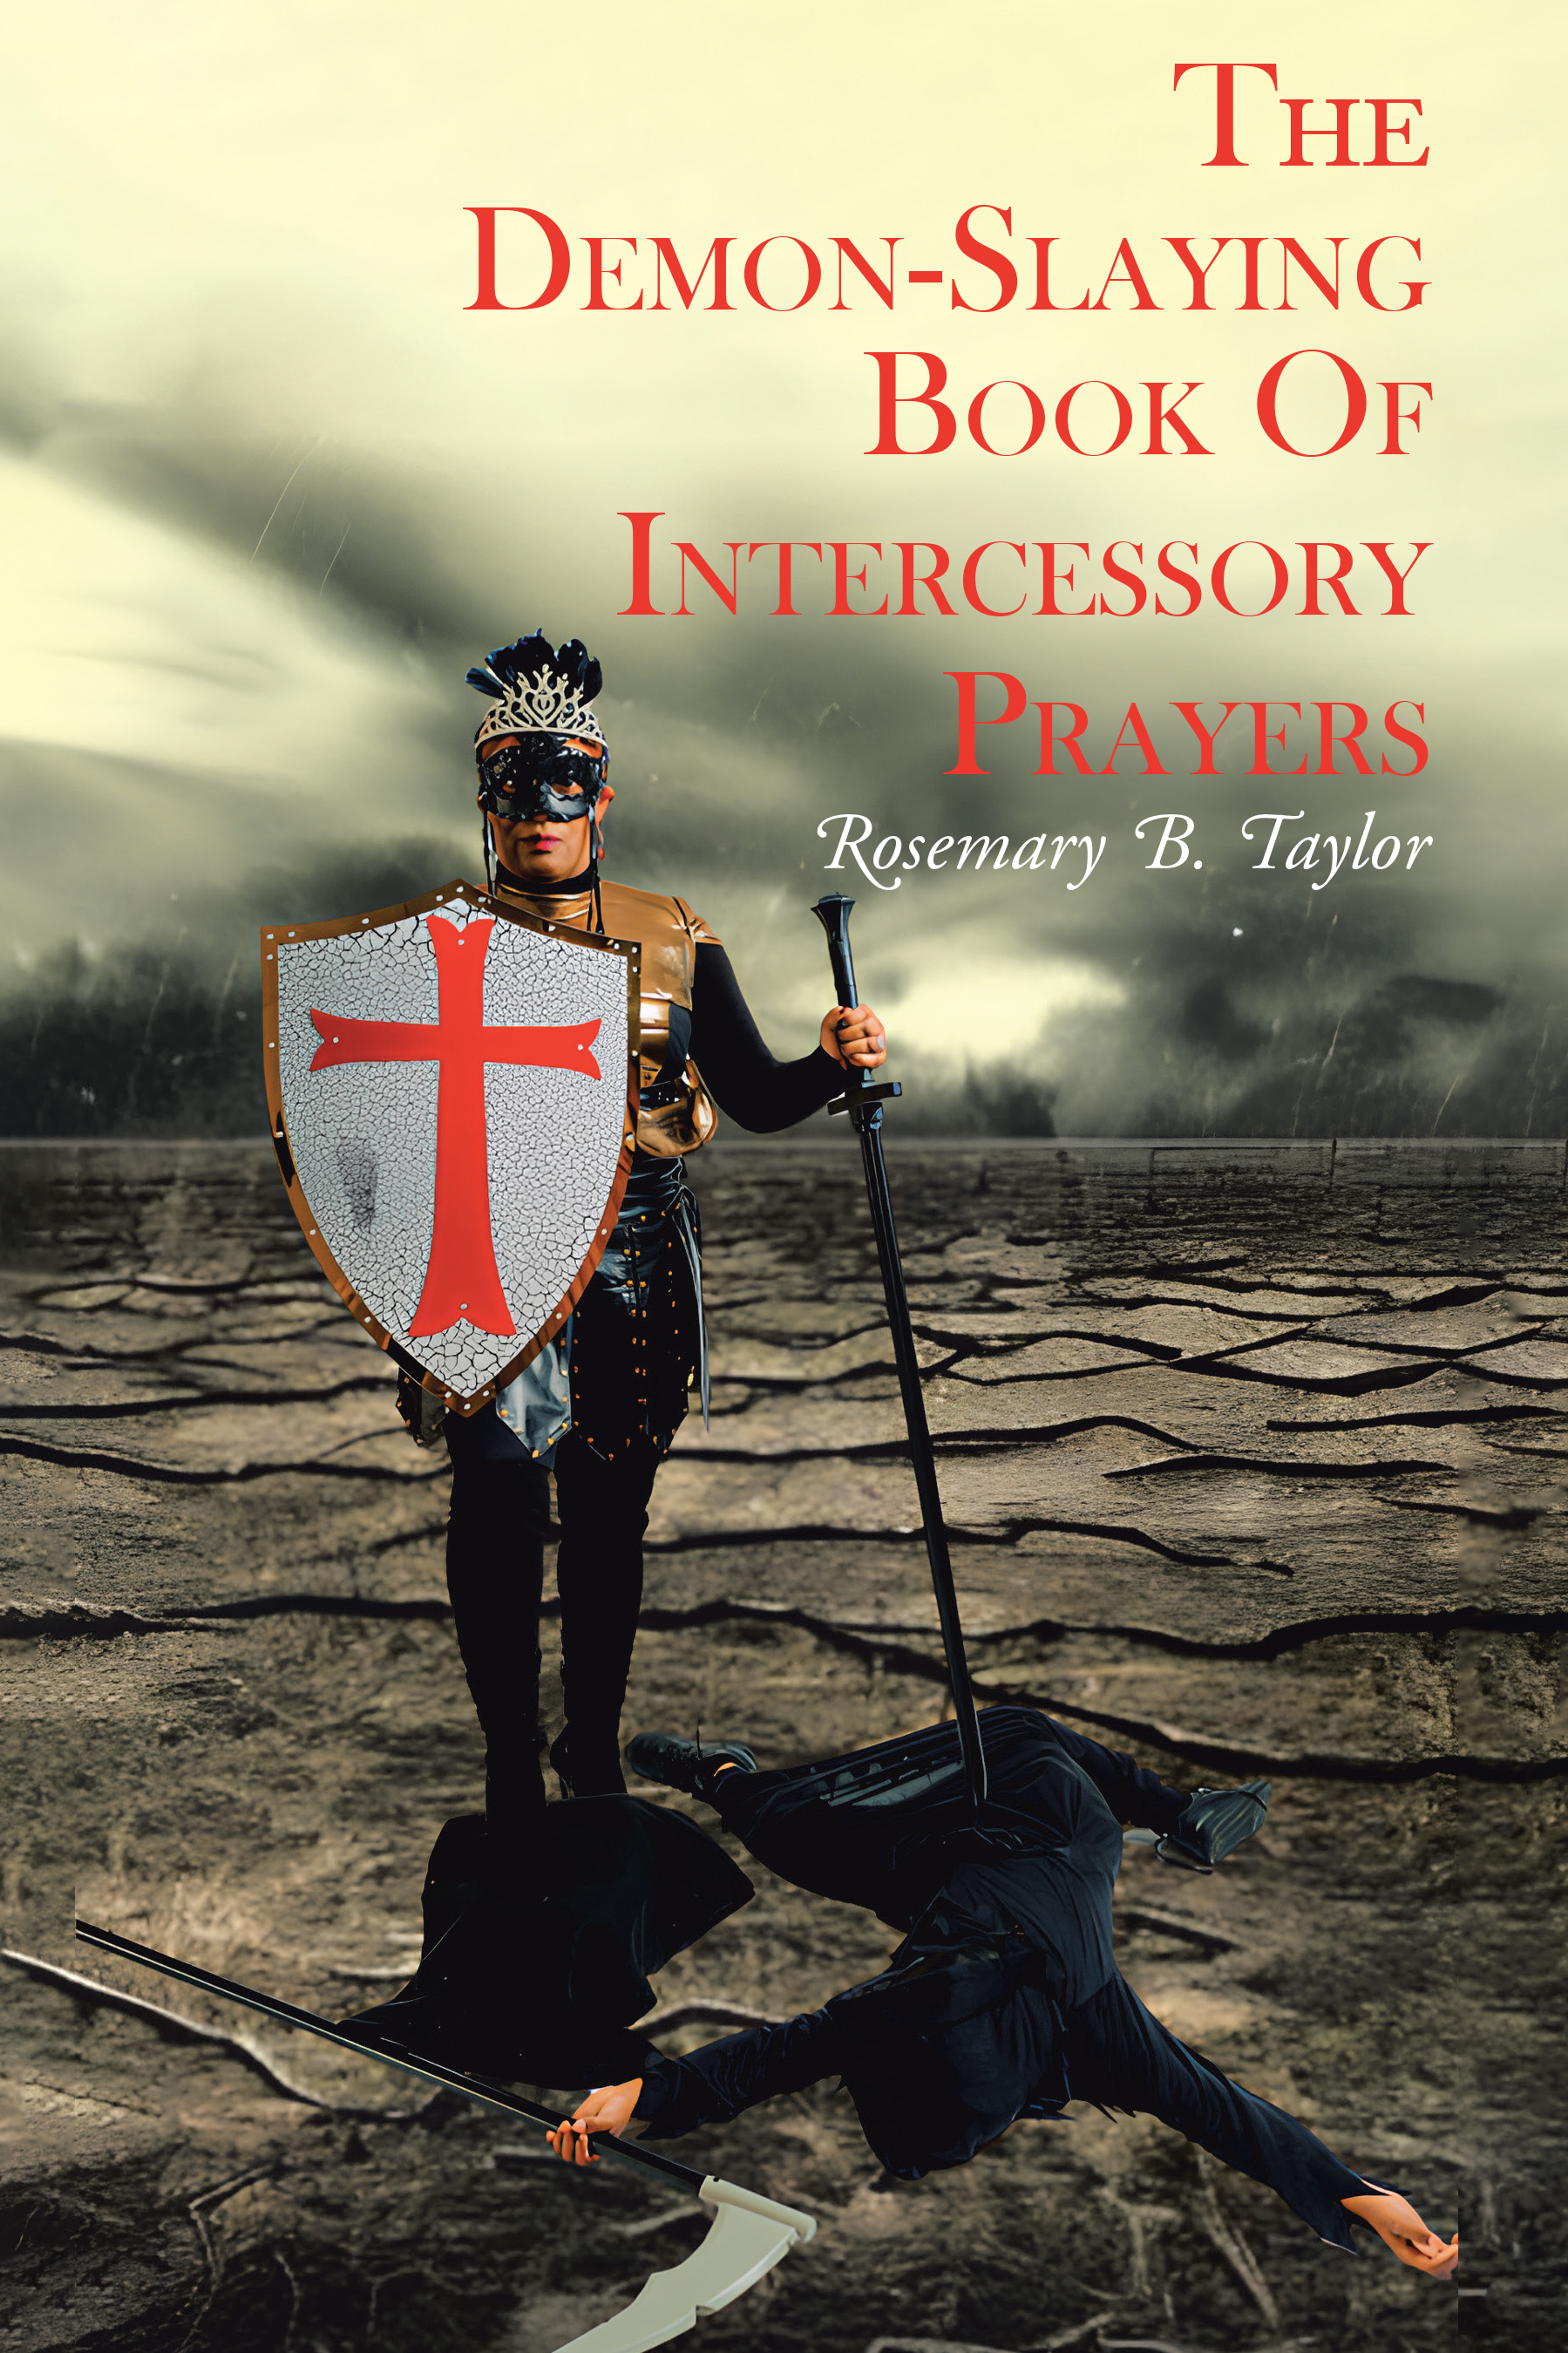 Rosemary B. Taylor’s Newly Released "The Demon-Slaying Book of Intercessory Prayers" is a Potent Guide to Spiritual Warfare